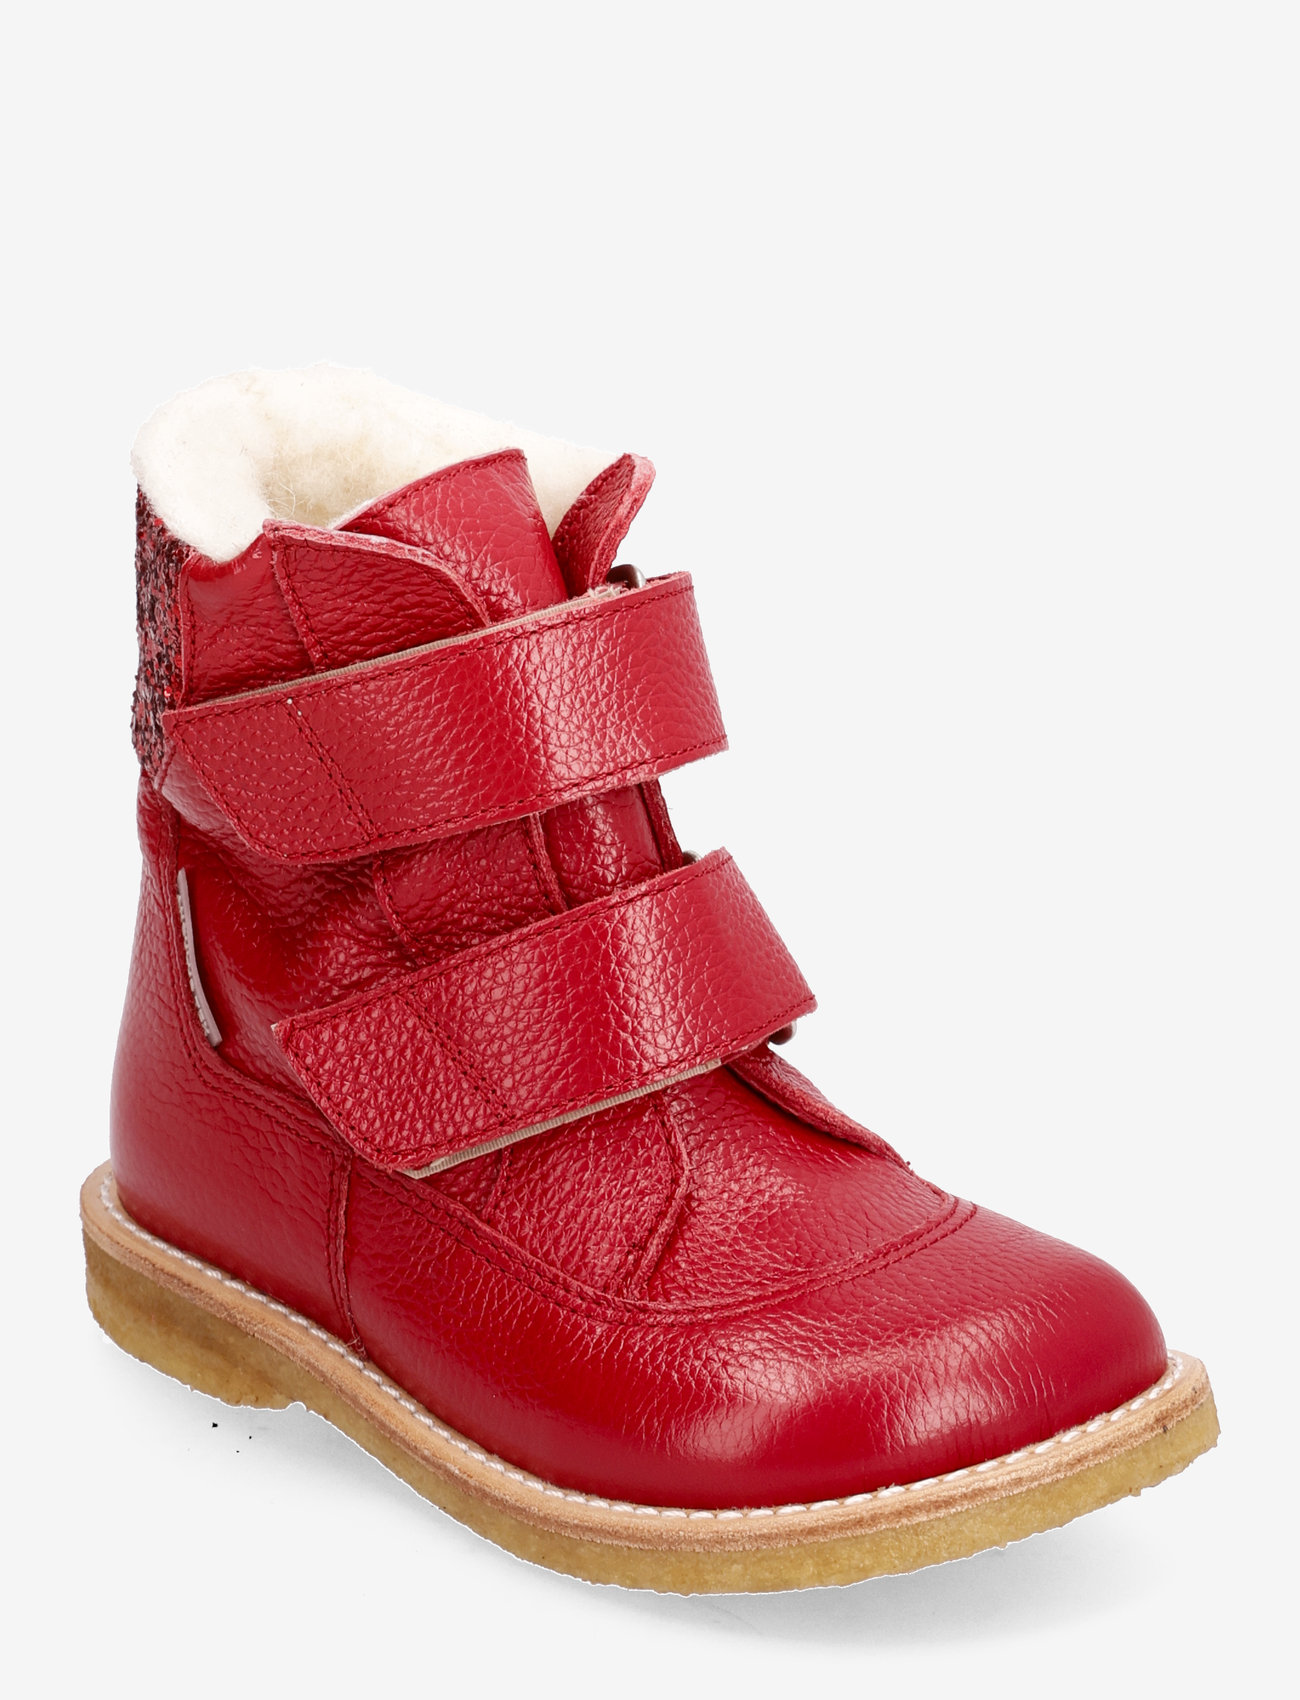 ANGULUS - Boots - flat - with velcro - børn - 2568/1711 red/red glitter - 0